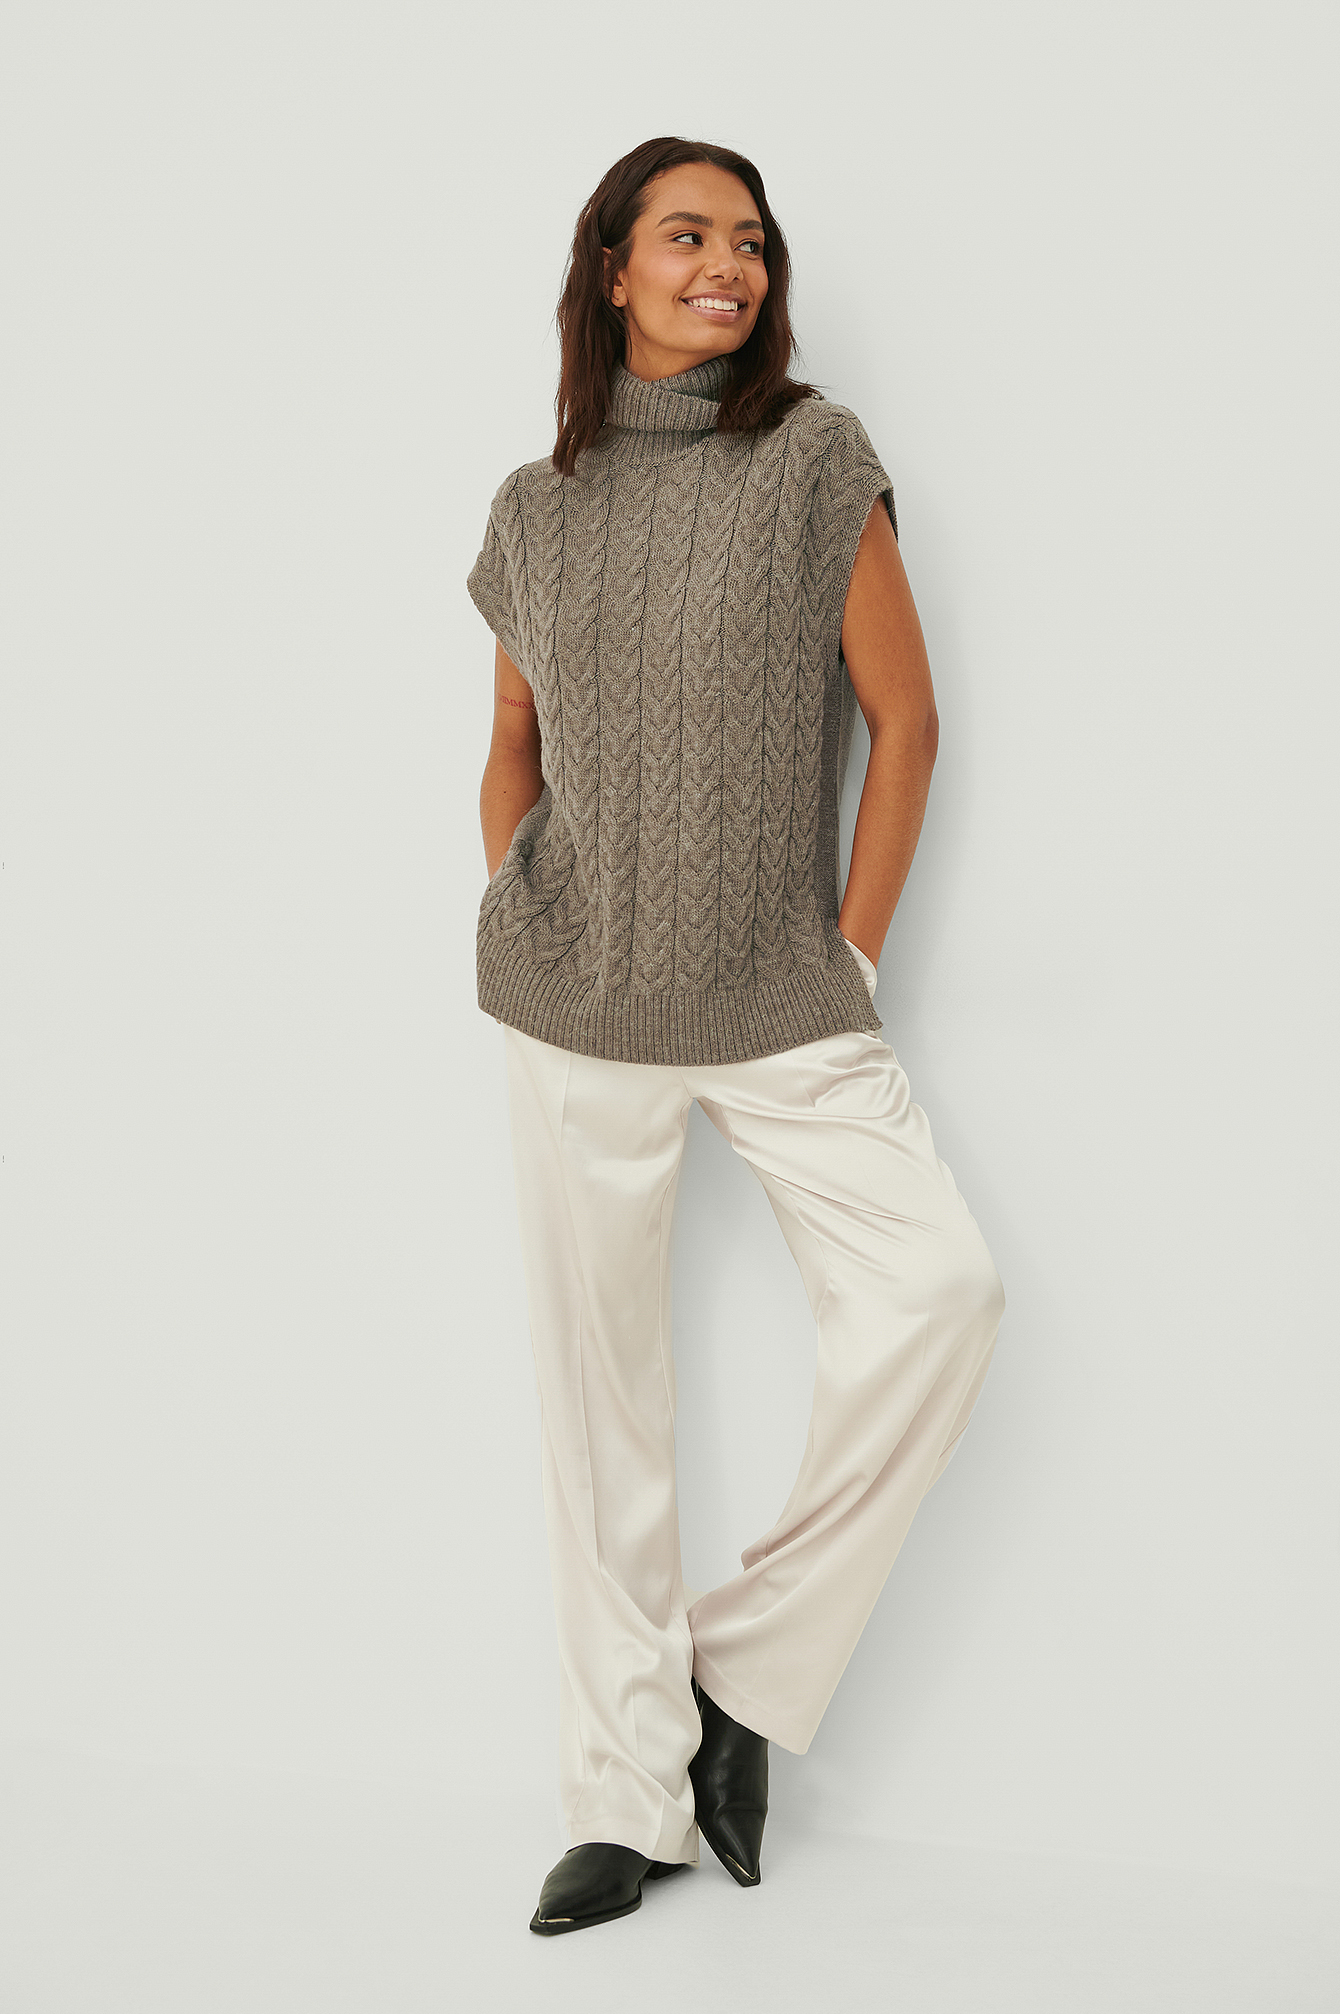 High Neck Cable Knitted Vest Outfit.